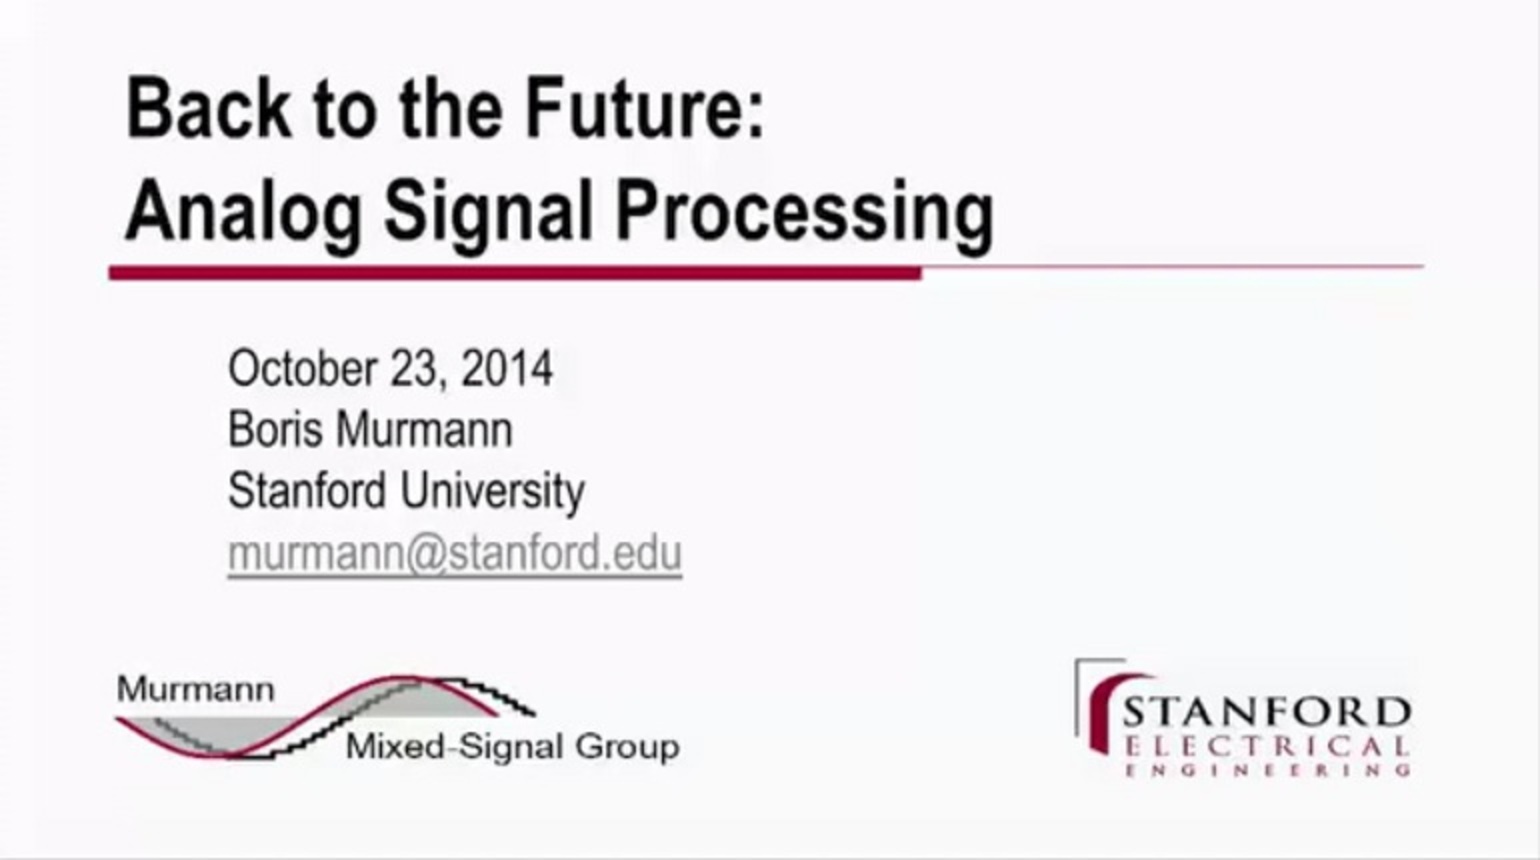 Back to the Future: Analog Signal Processing Video